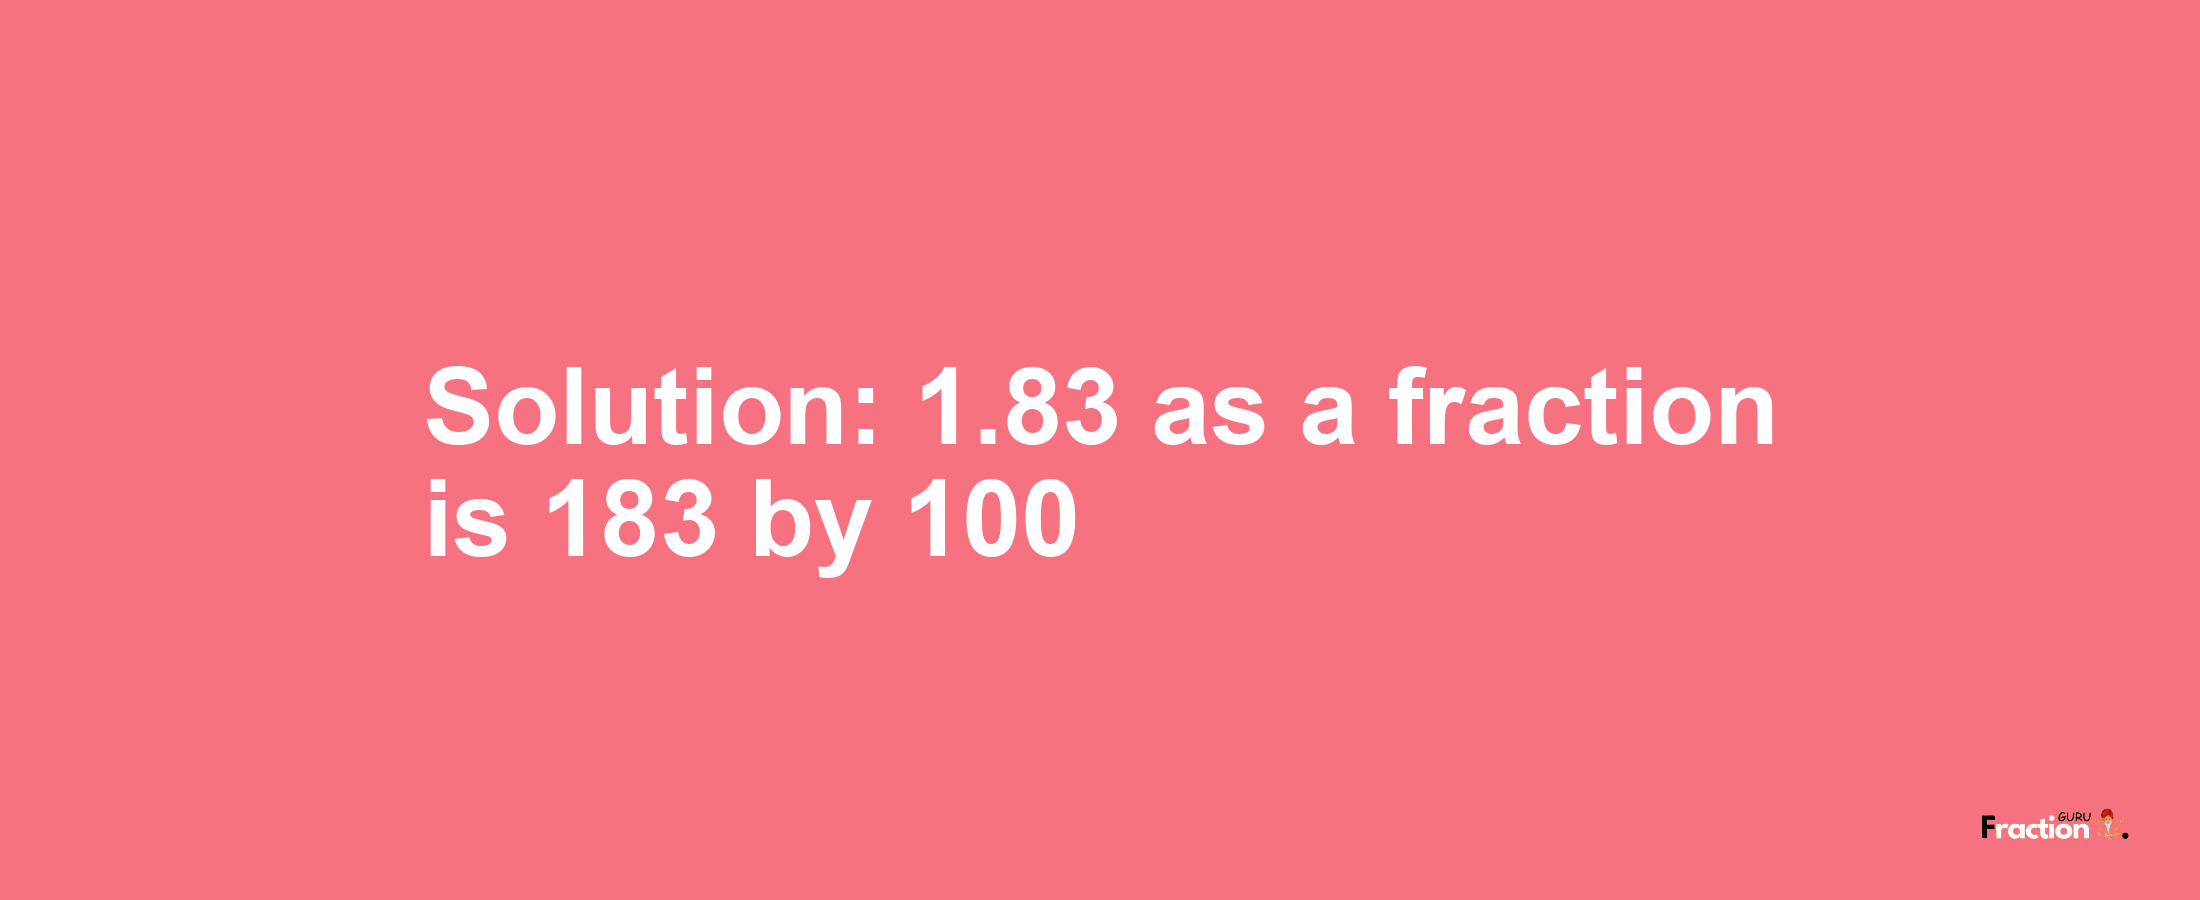 Solution:1.83 as a fraction is 183/100